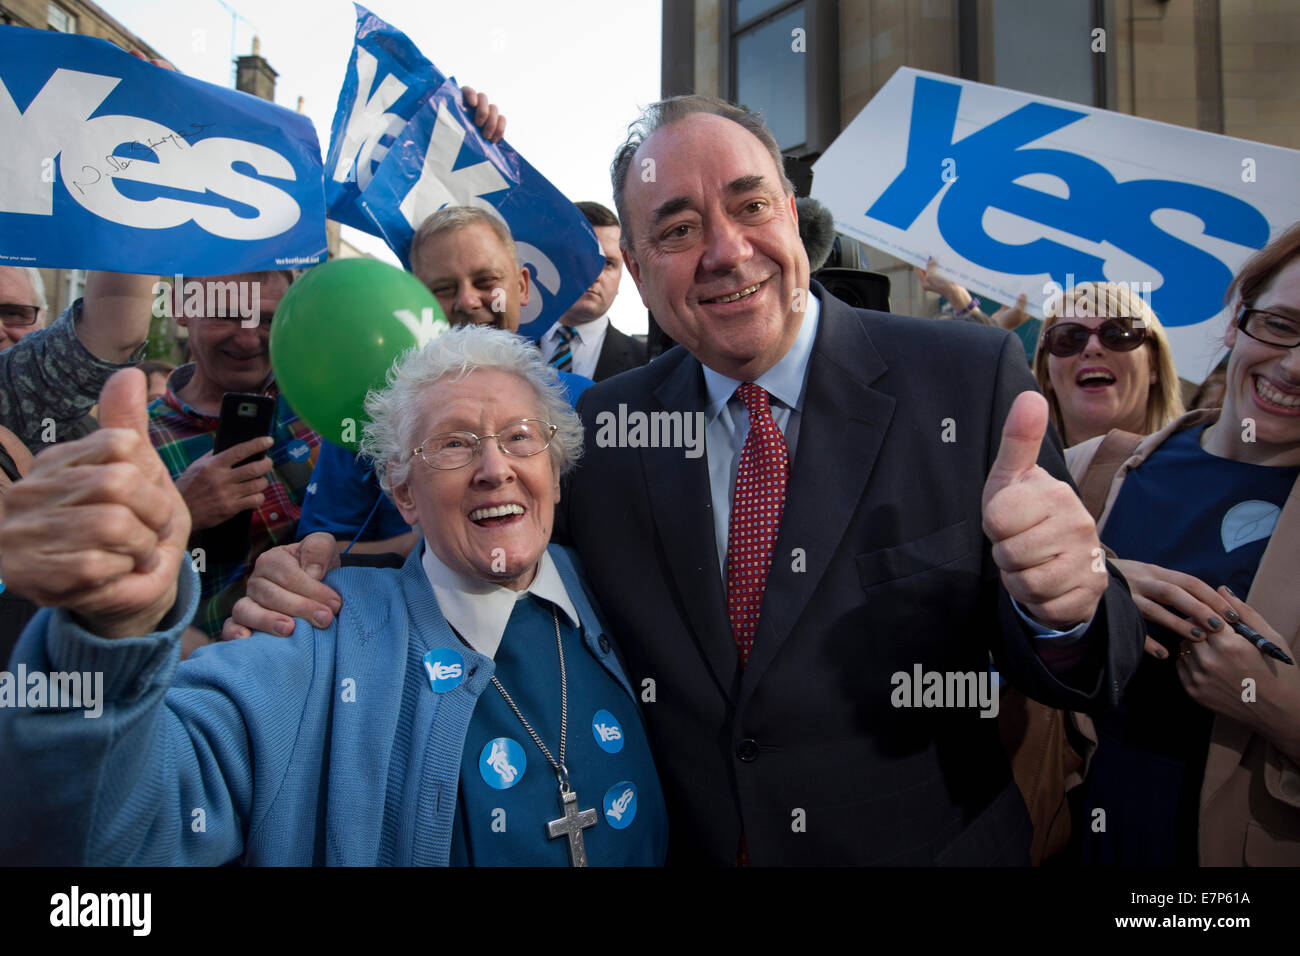 Scotland's First Minister Alex Salmond MSP is pictured with a supporter called Sister Elizabeth at an event in Perth. Stock Photo